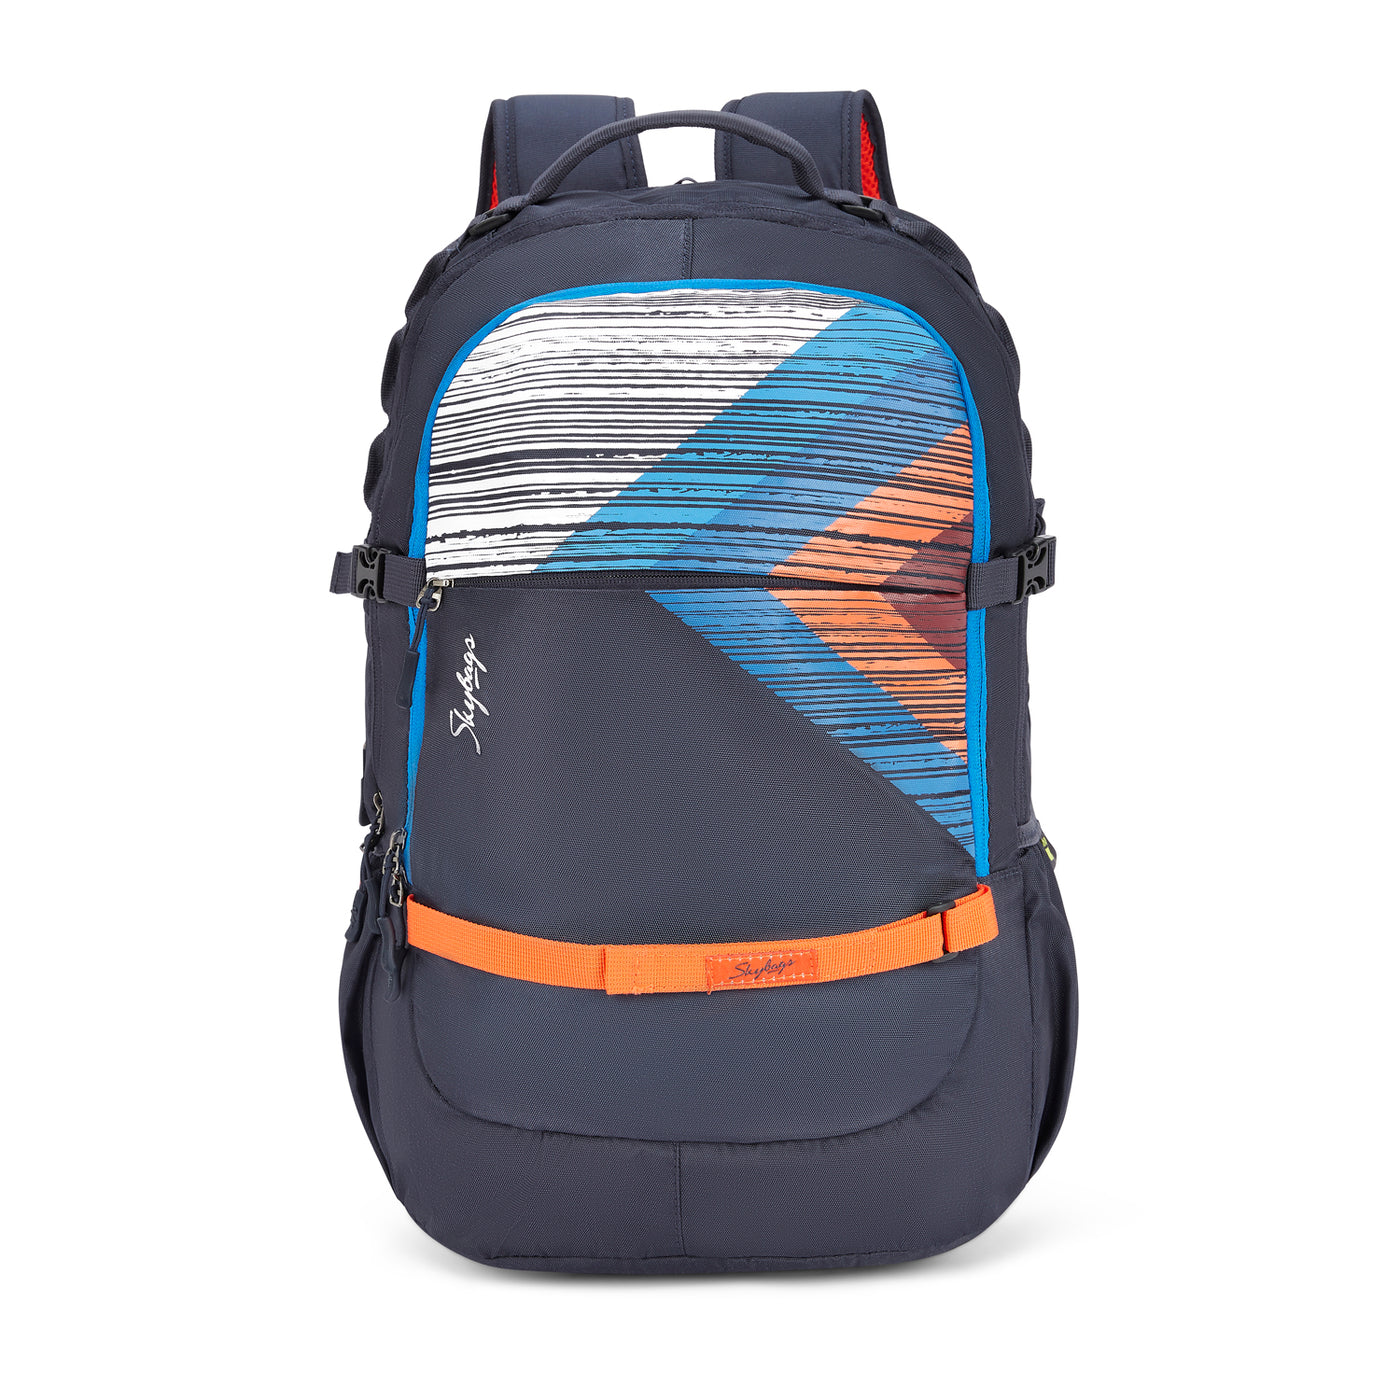 Skybags Clove Laptop Backpack - Sunrise Trading Co.